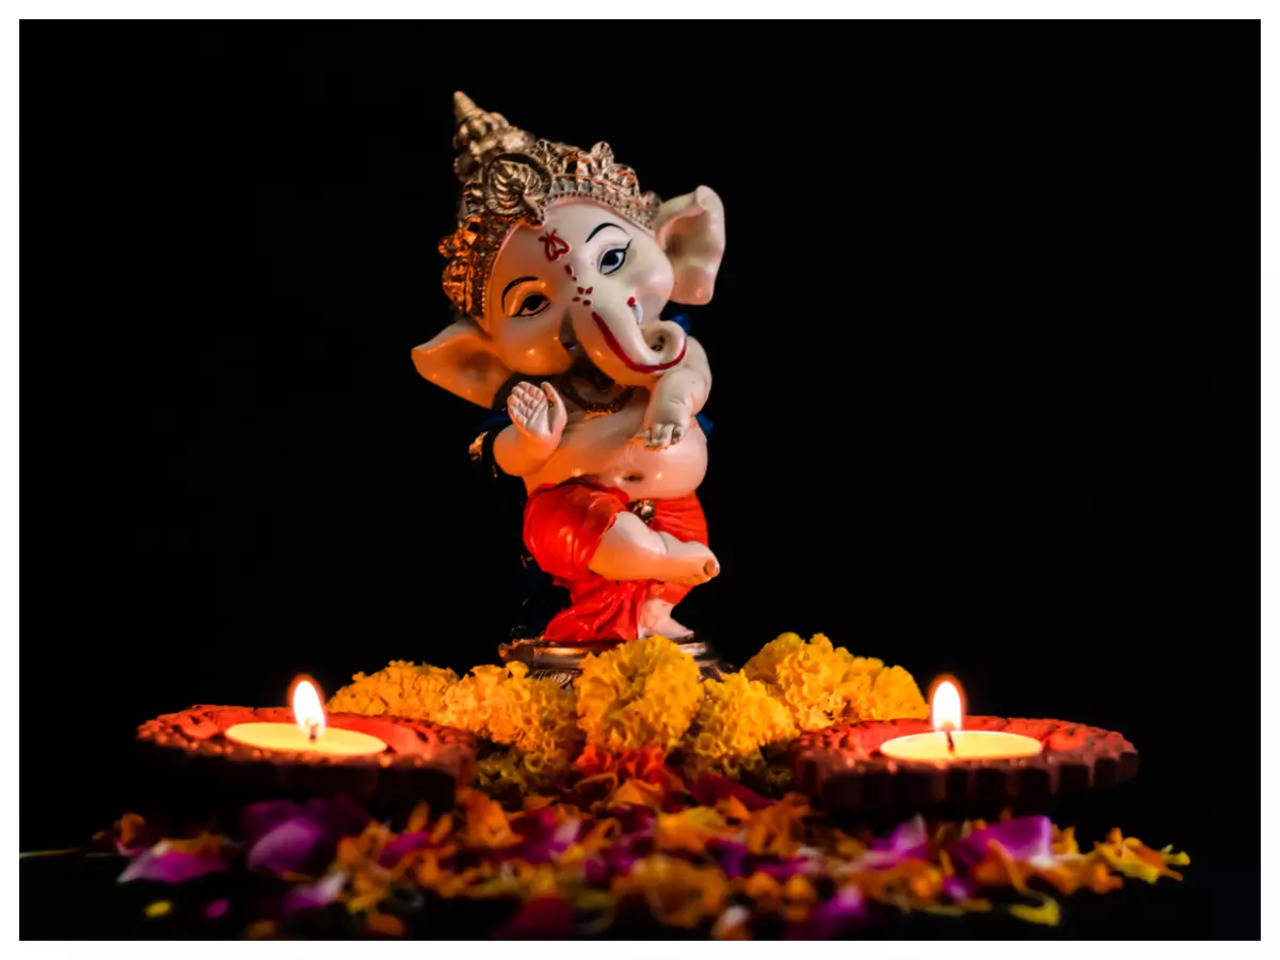 Ganesh Chaturthi 2021: Significance, puja vidhi and foods - Times ...